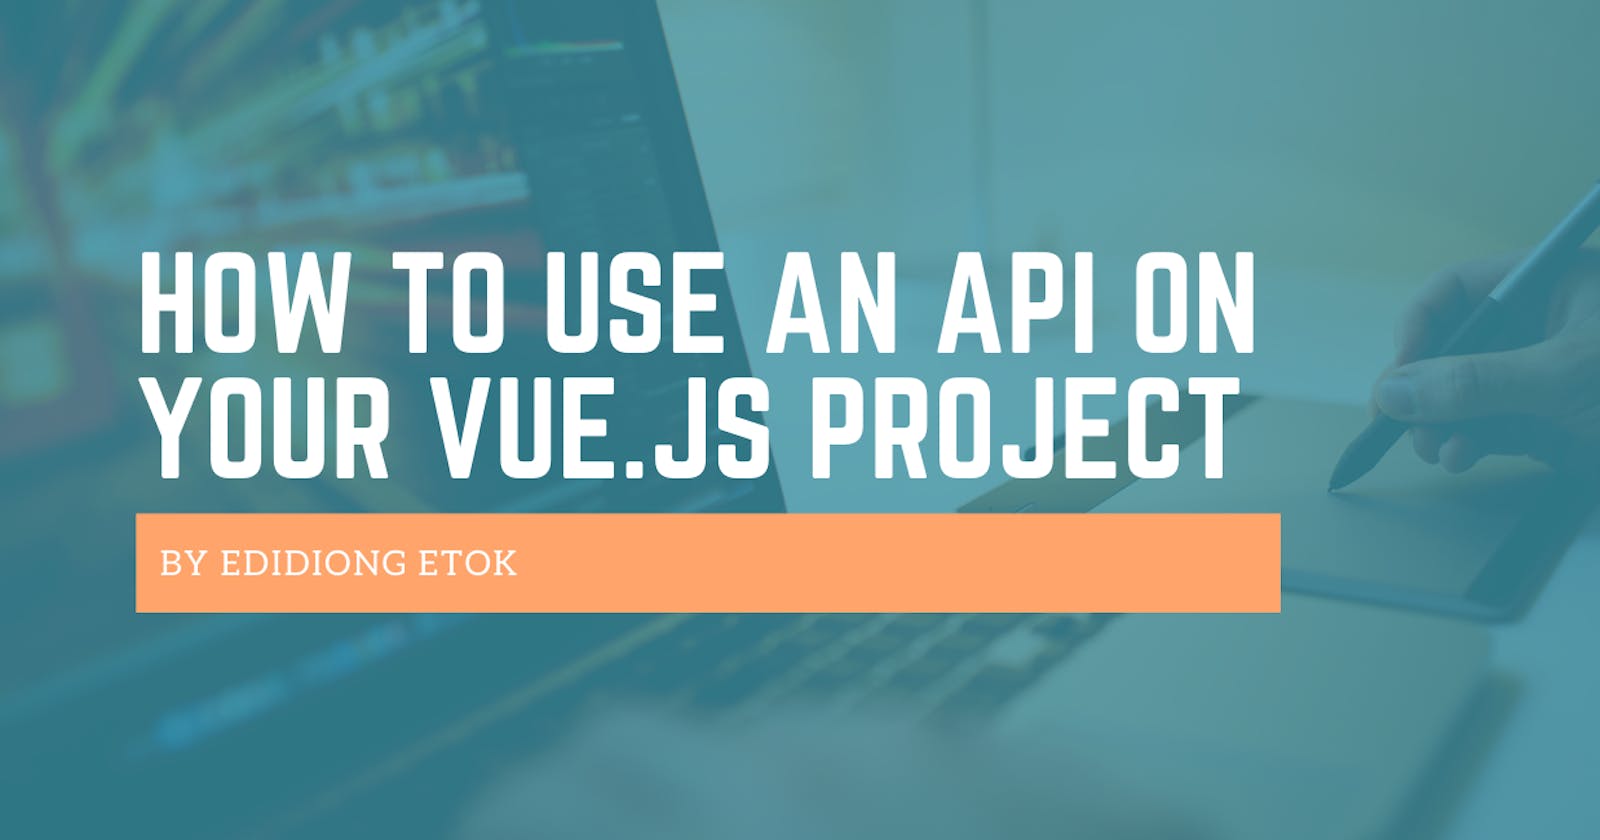 How to use an API on your Vue.js project